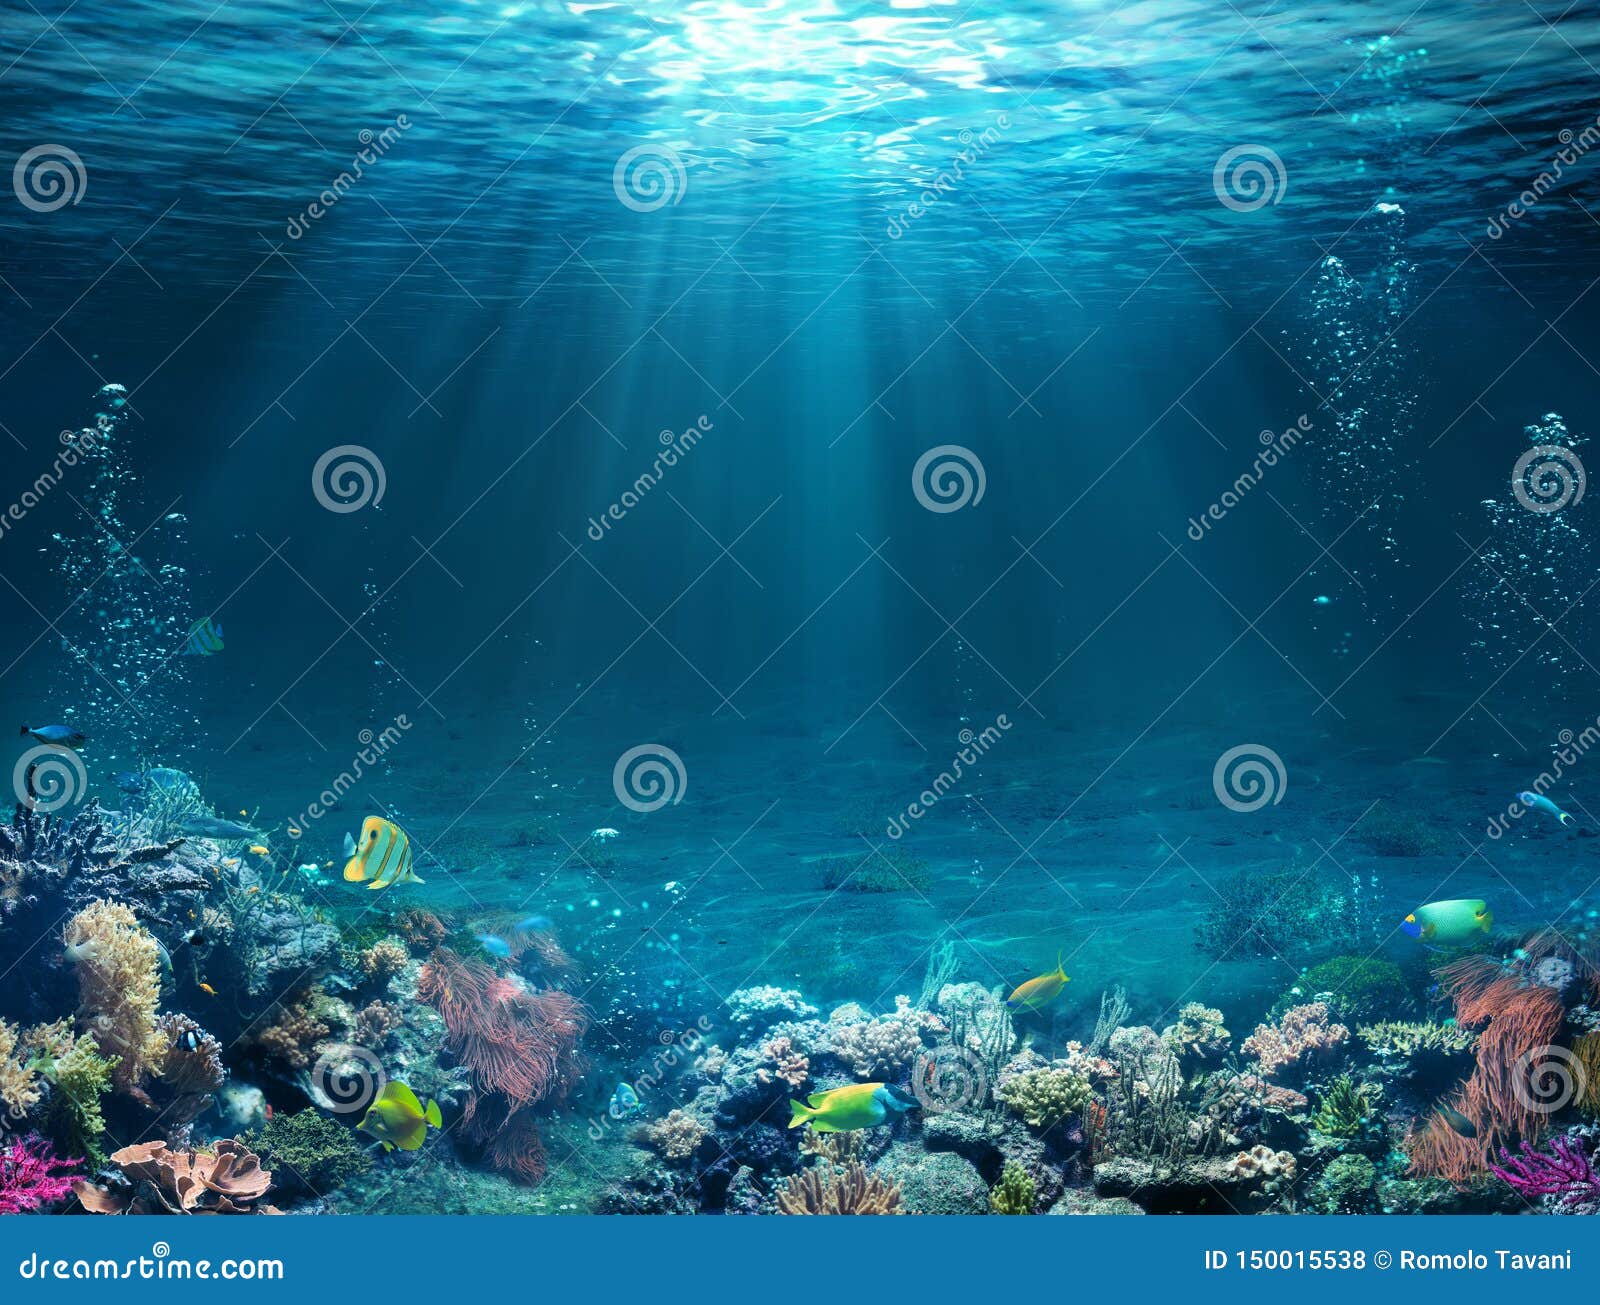 underwater scene - tropical seabed with reef